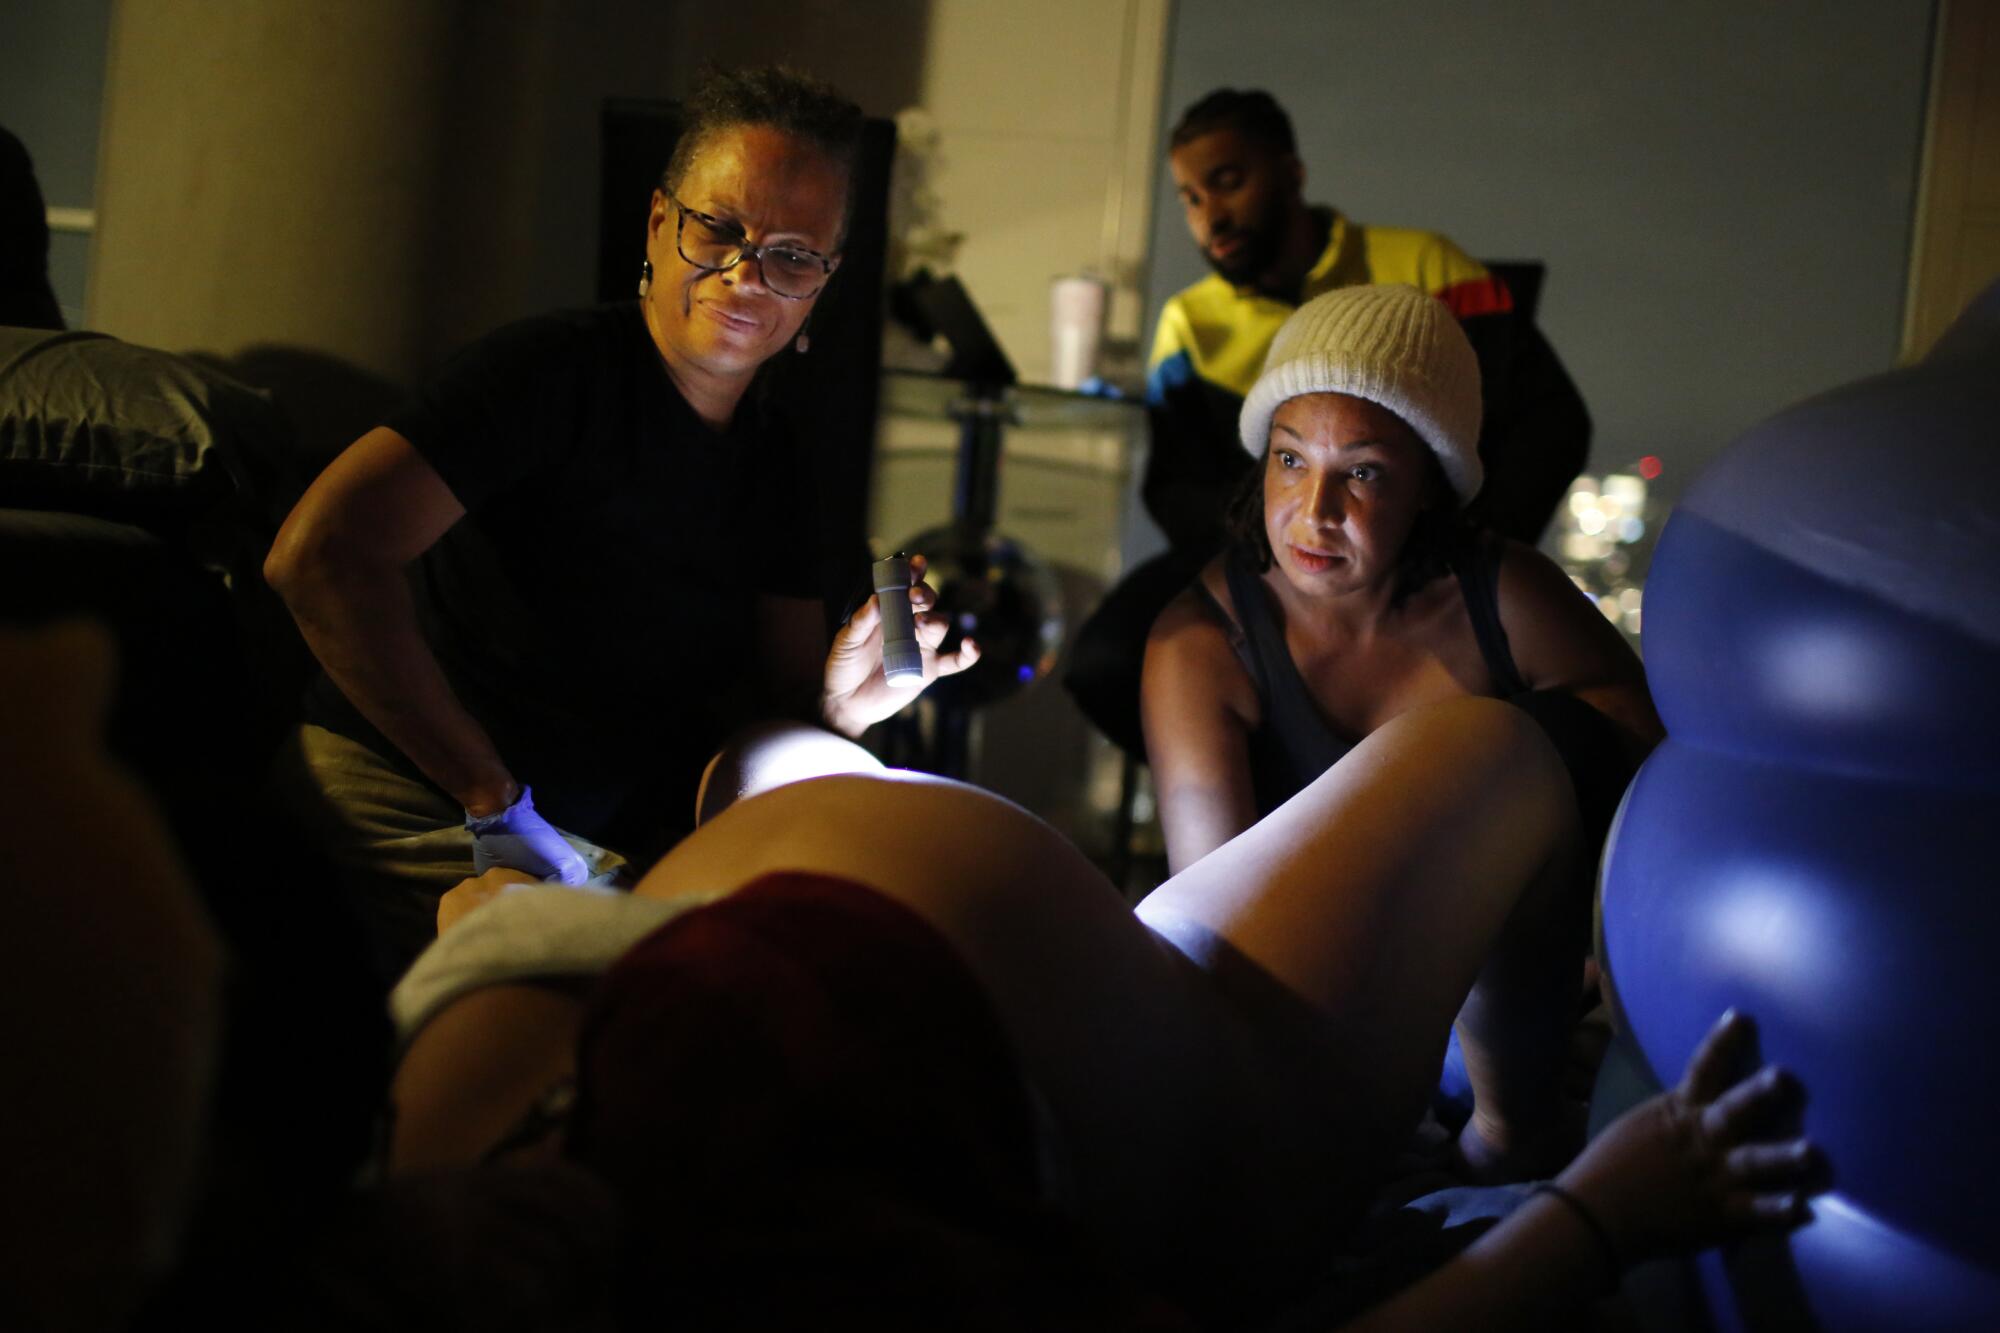 Two women assist a woman during labor